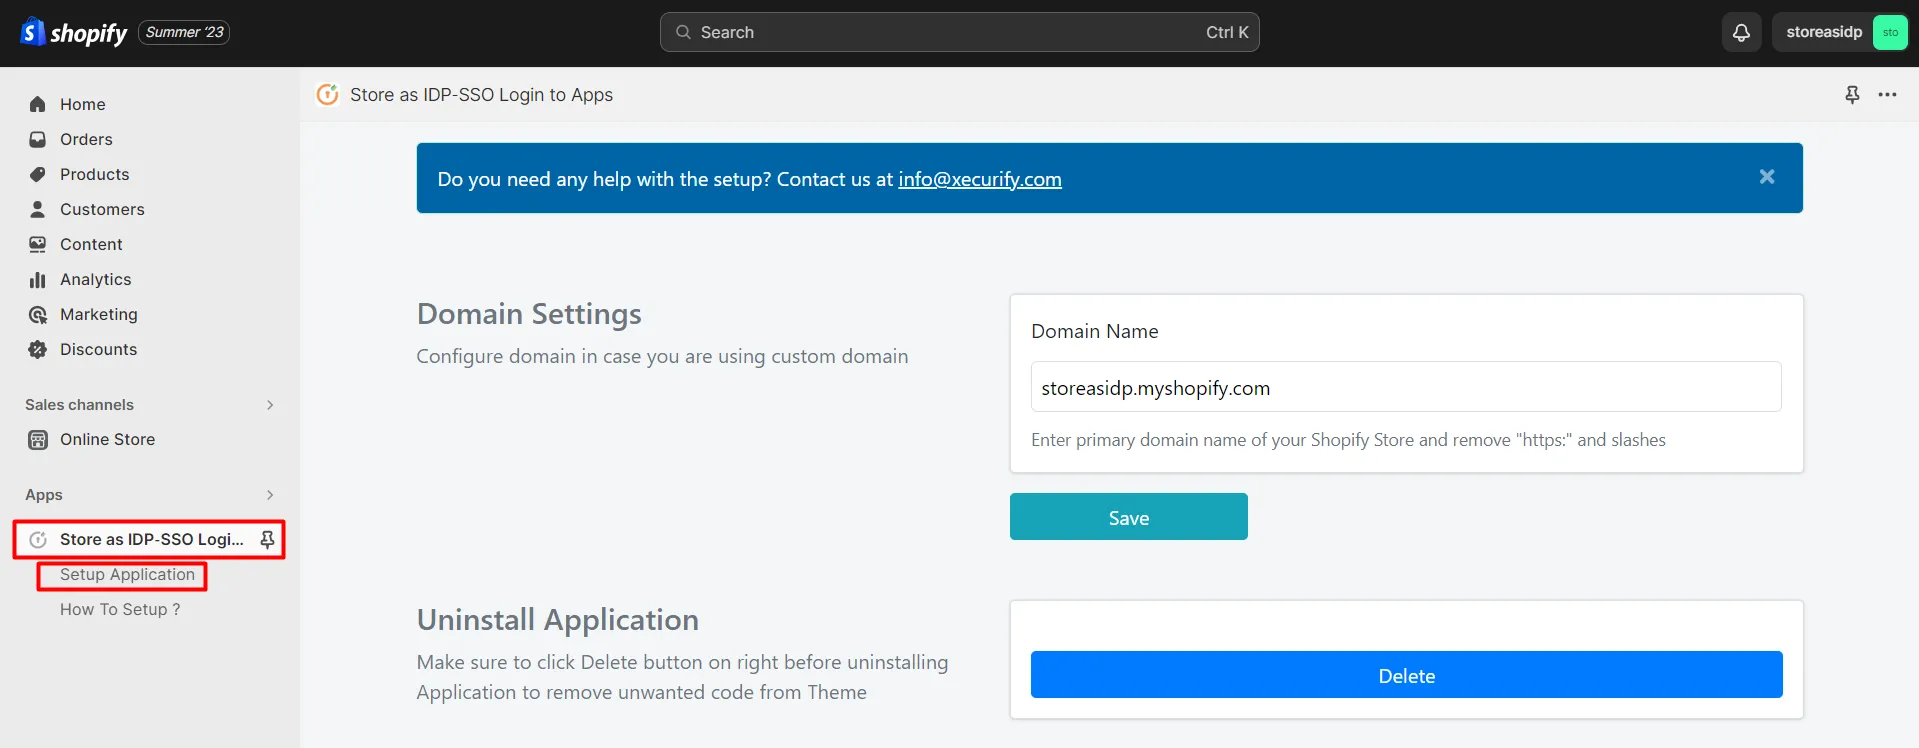 Shopify as IDP - Login using Shopify credentials - Setup application